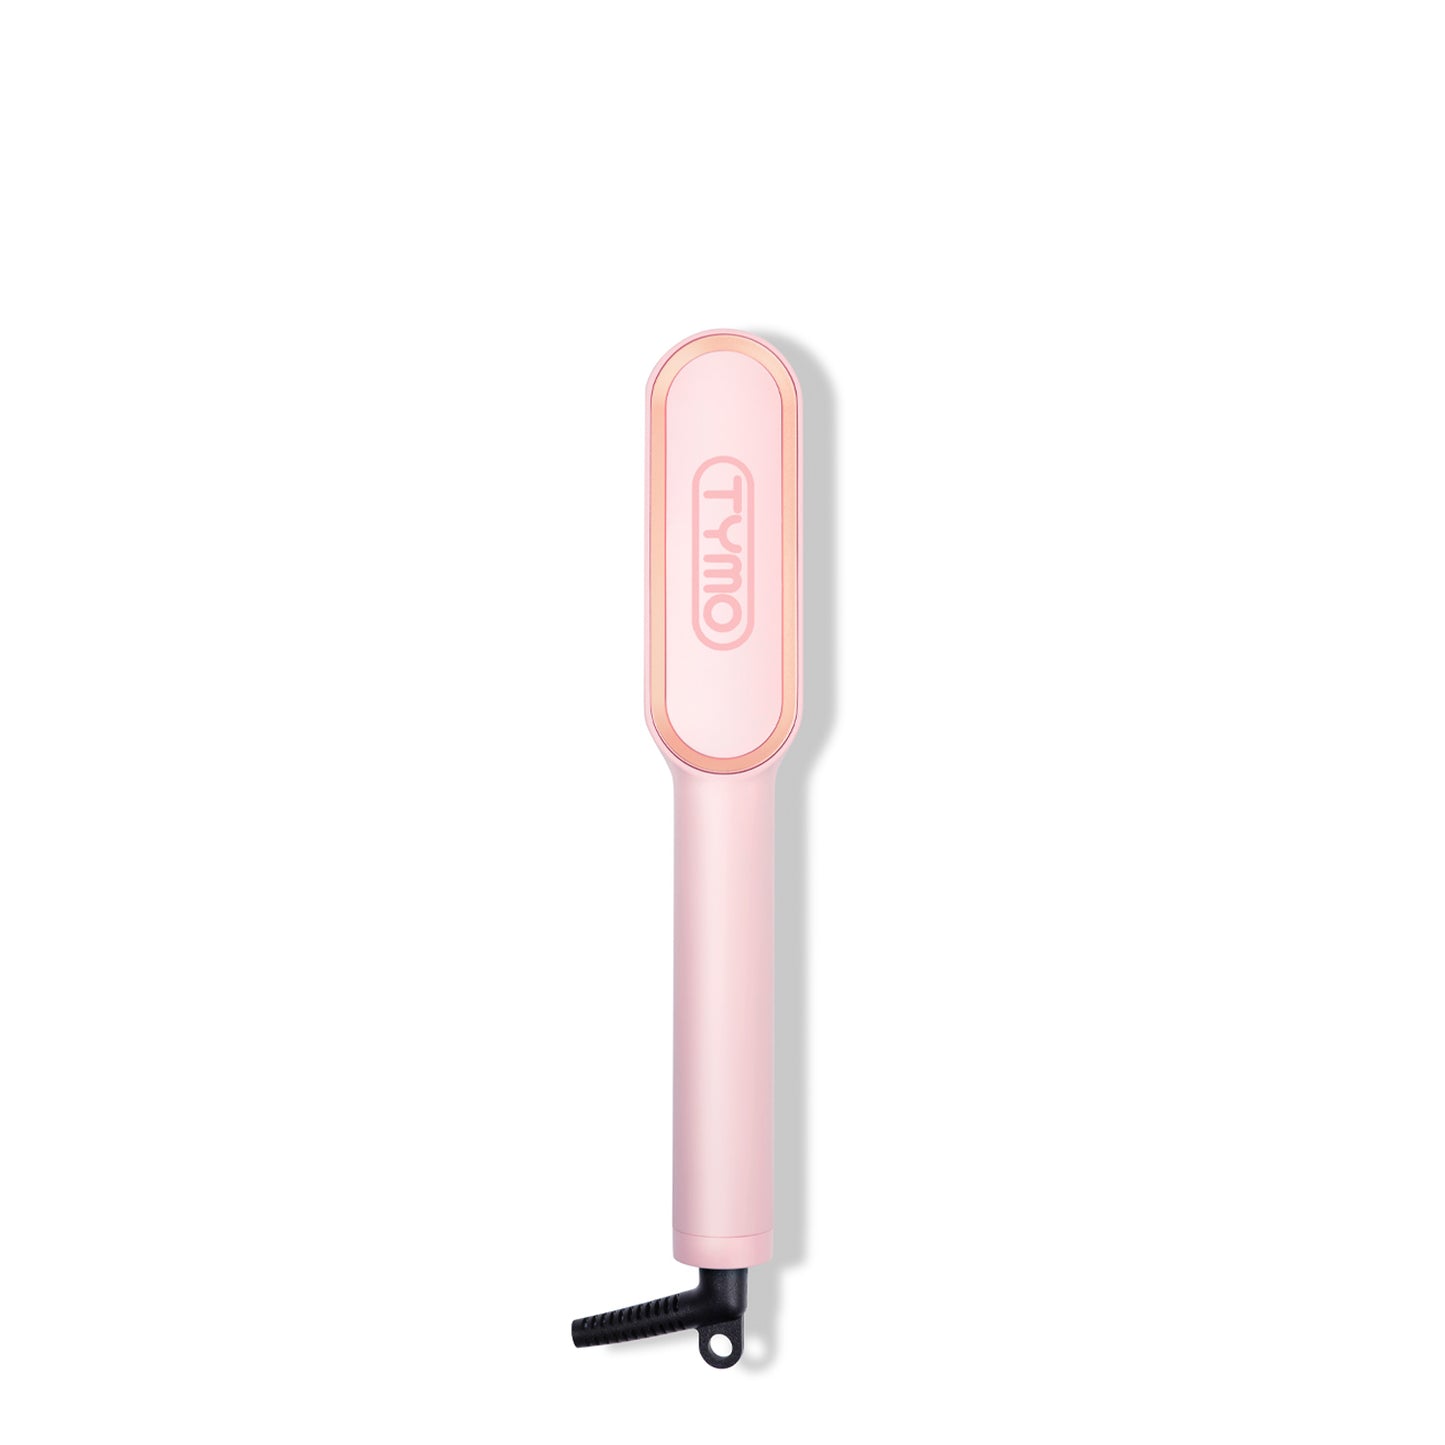 TYMO RING PINK, a sleek comb hair styling tool designed for efficient and safe hair straightening.